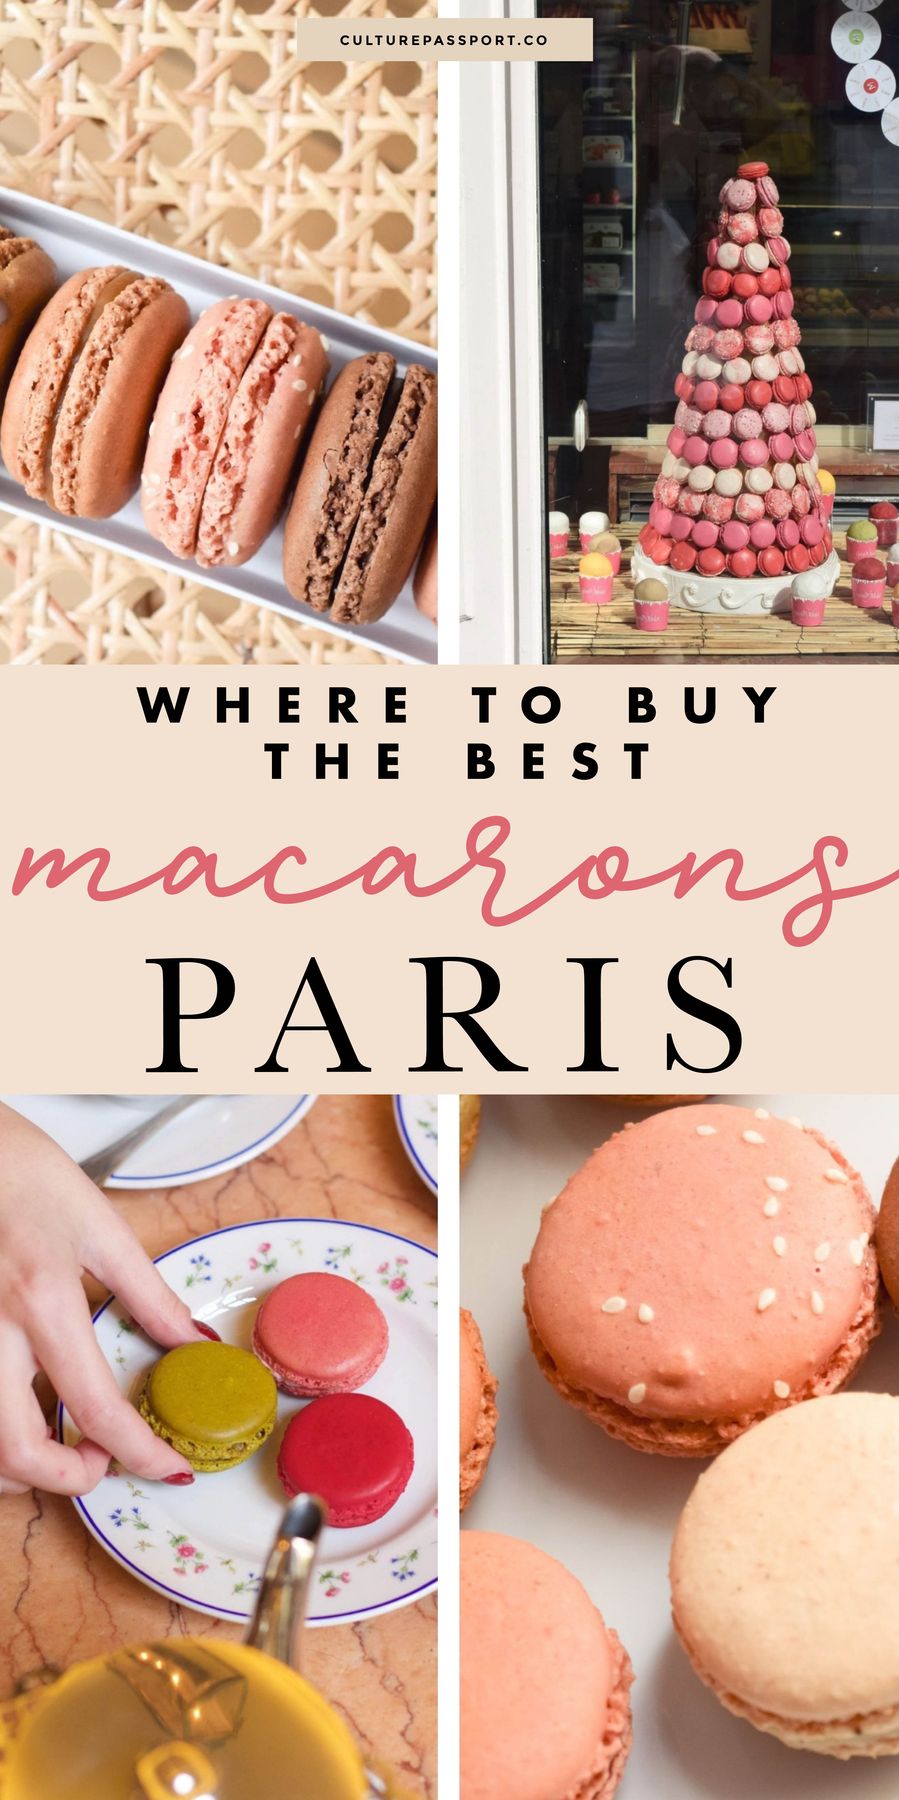 Where To Buy The Best Macarons In Paris! #macarons #paristips #paristravel #parisguide